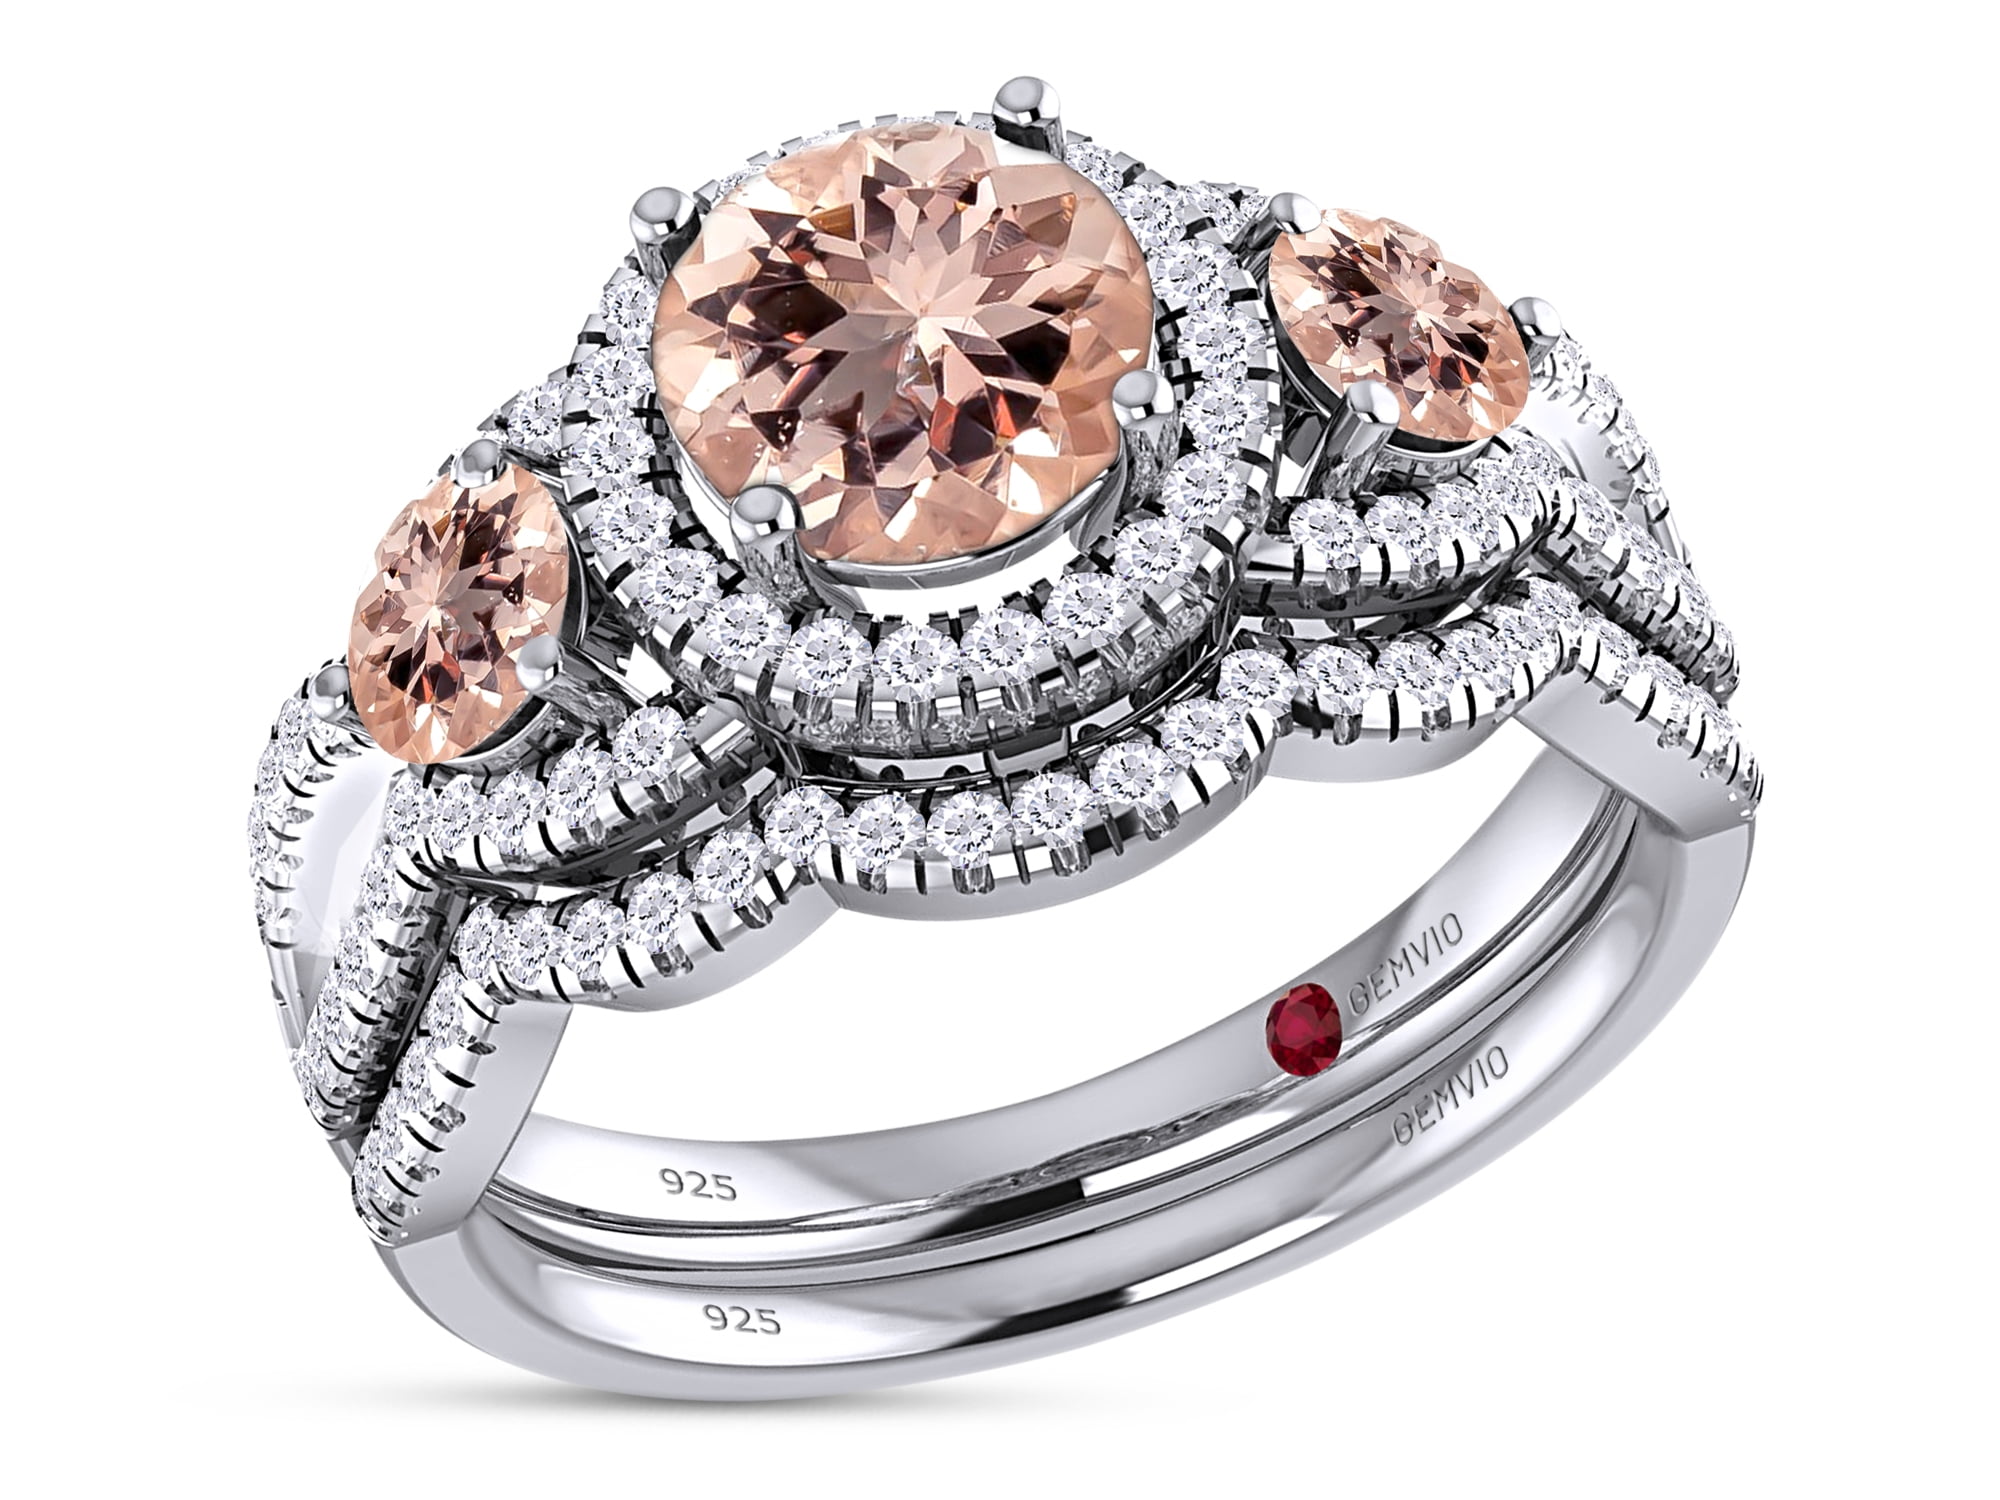 Wishrocks Round Cut Brown Cubic Zirconia Cluster Ring in 14K White Gold Over Sterling Silver 